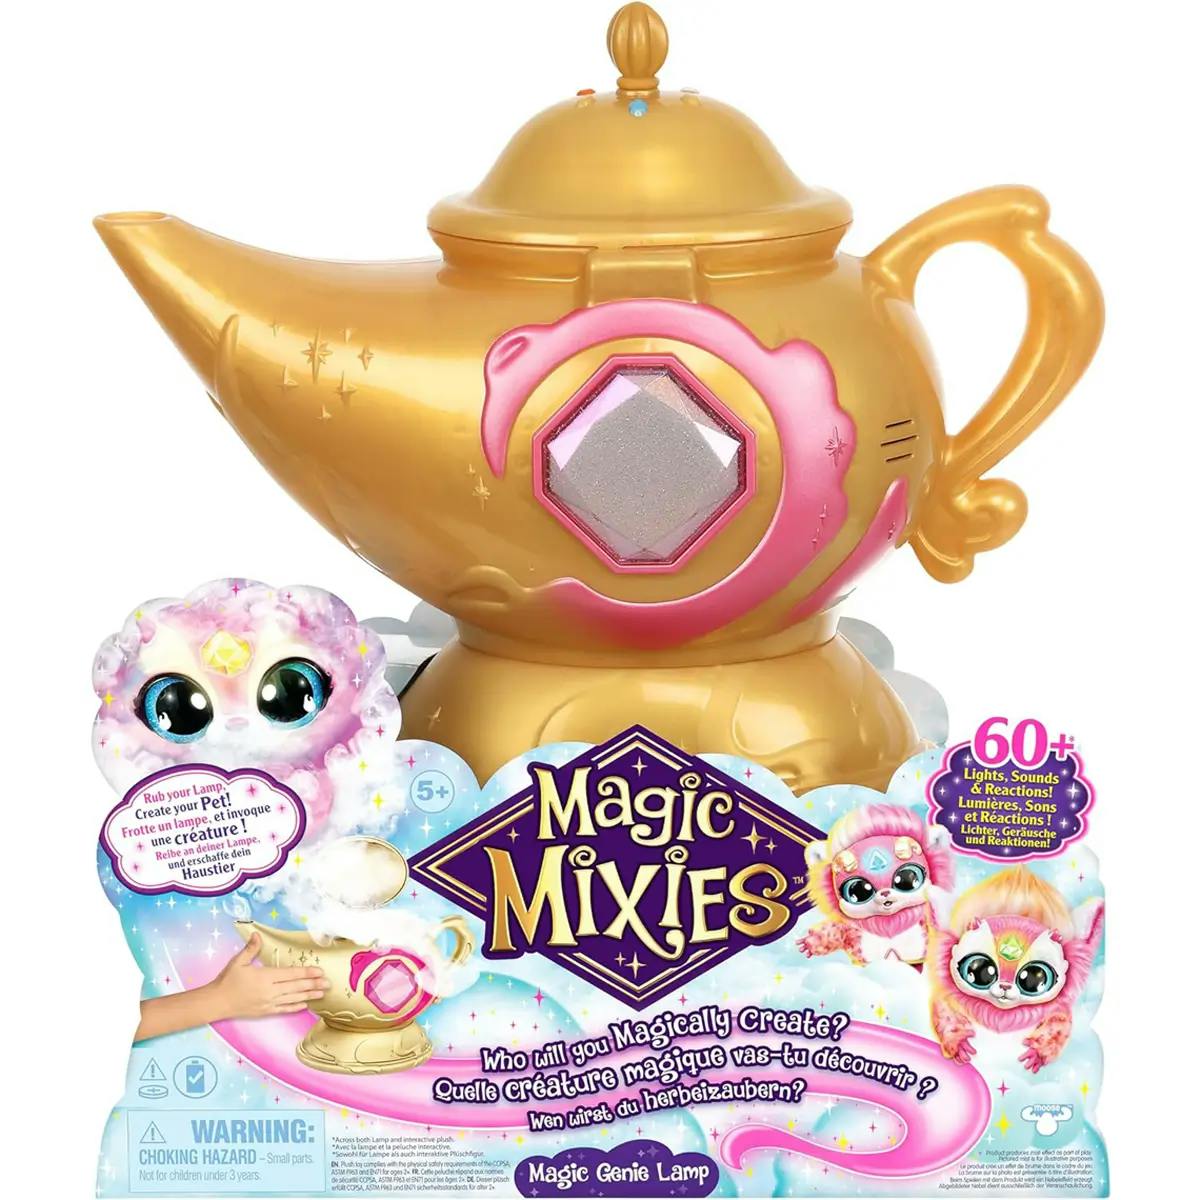 Magic Mixies Magic Genie Lamp with interactive 8" pink plush toy.